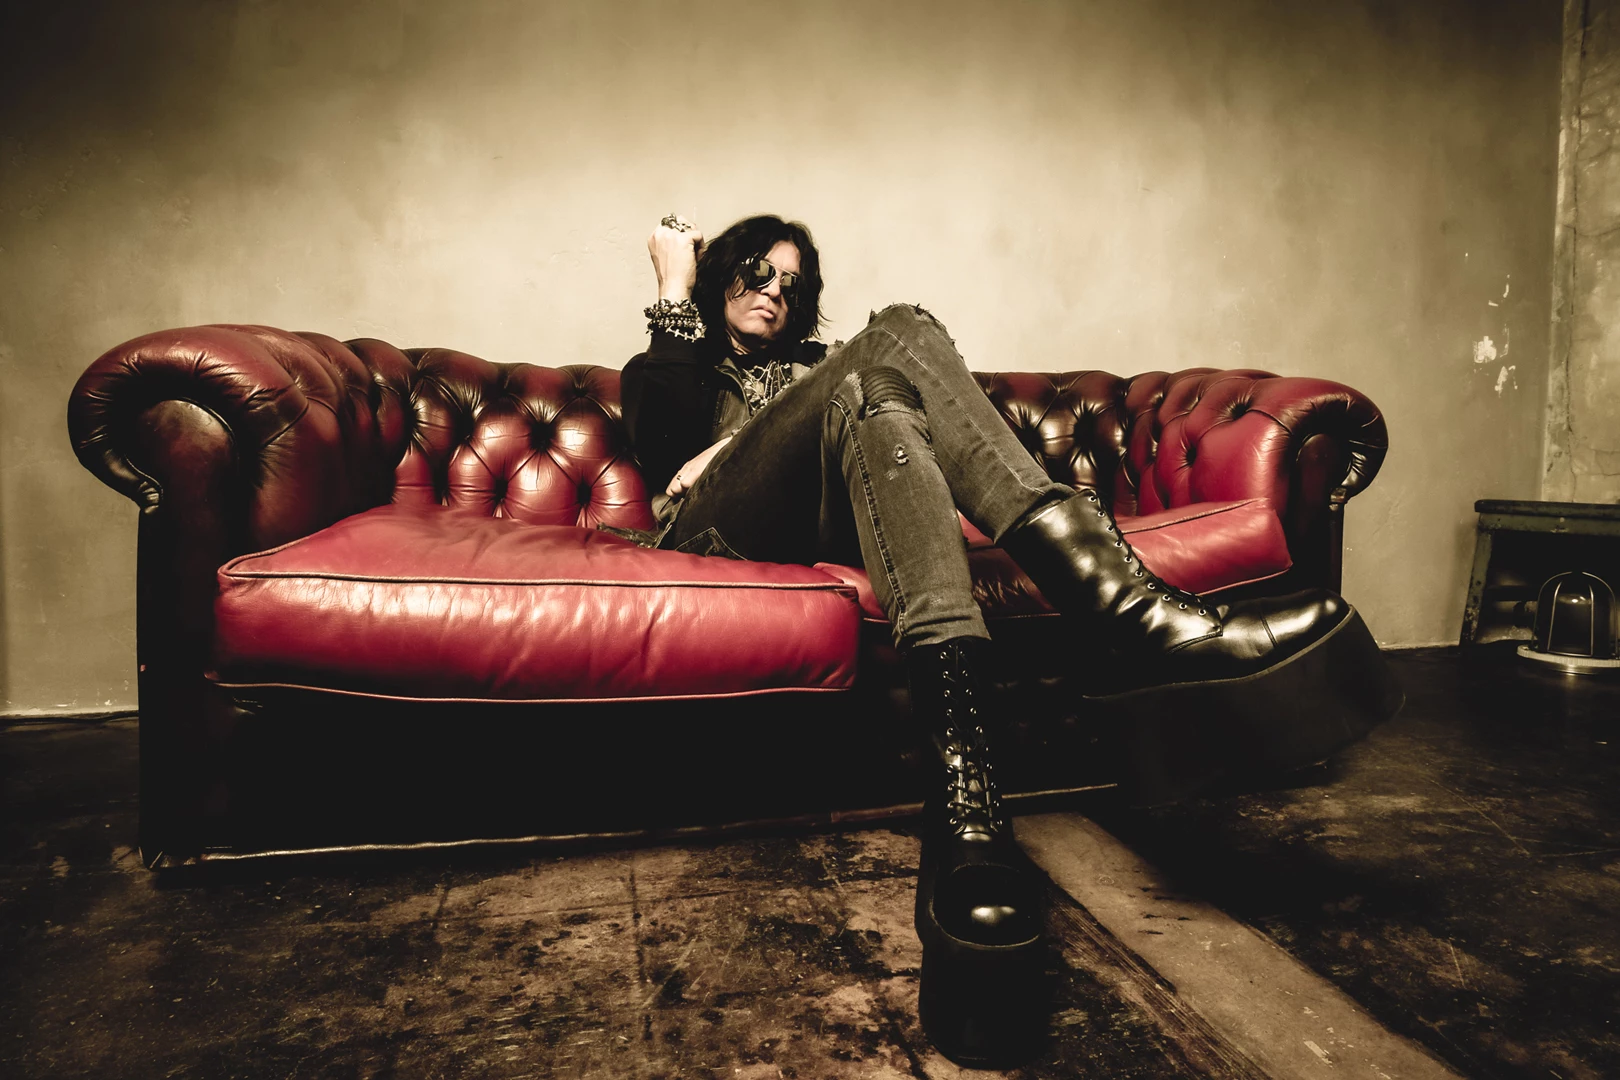 Tom Keifer Hospitalized in Pennsylvania After Pre-Show Collapse